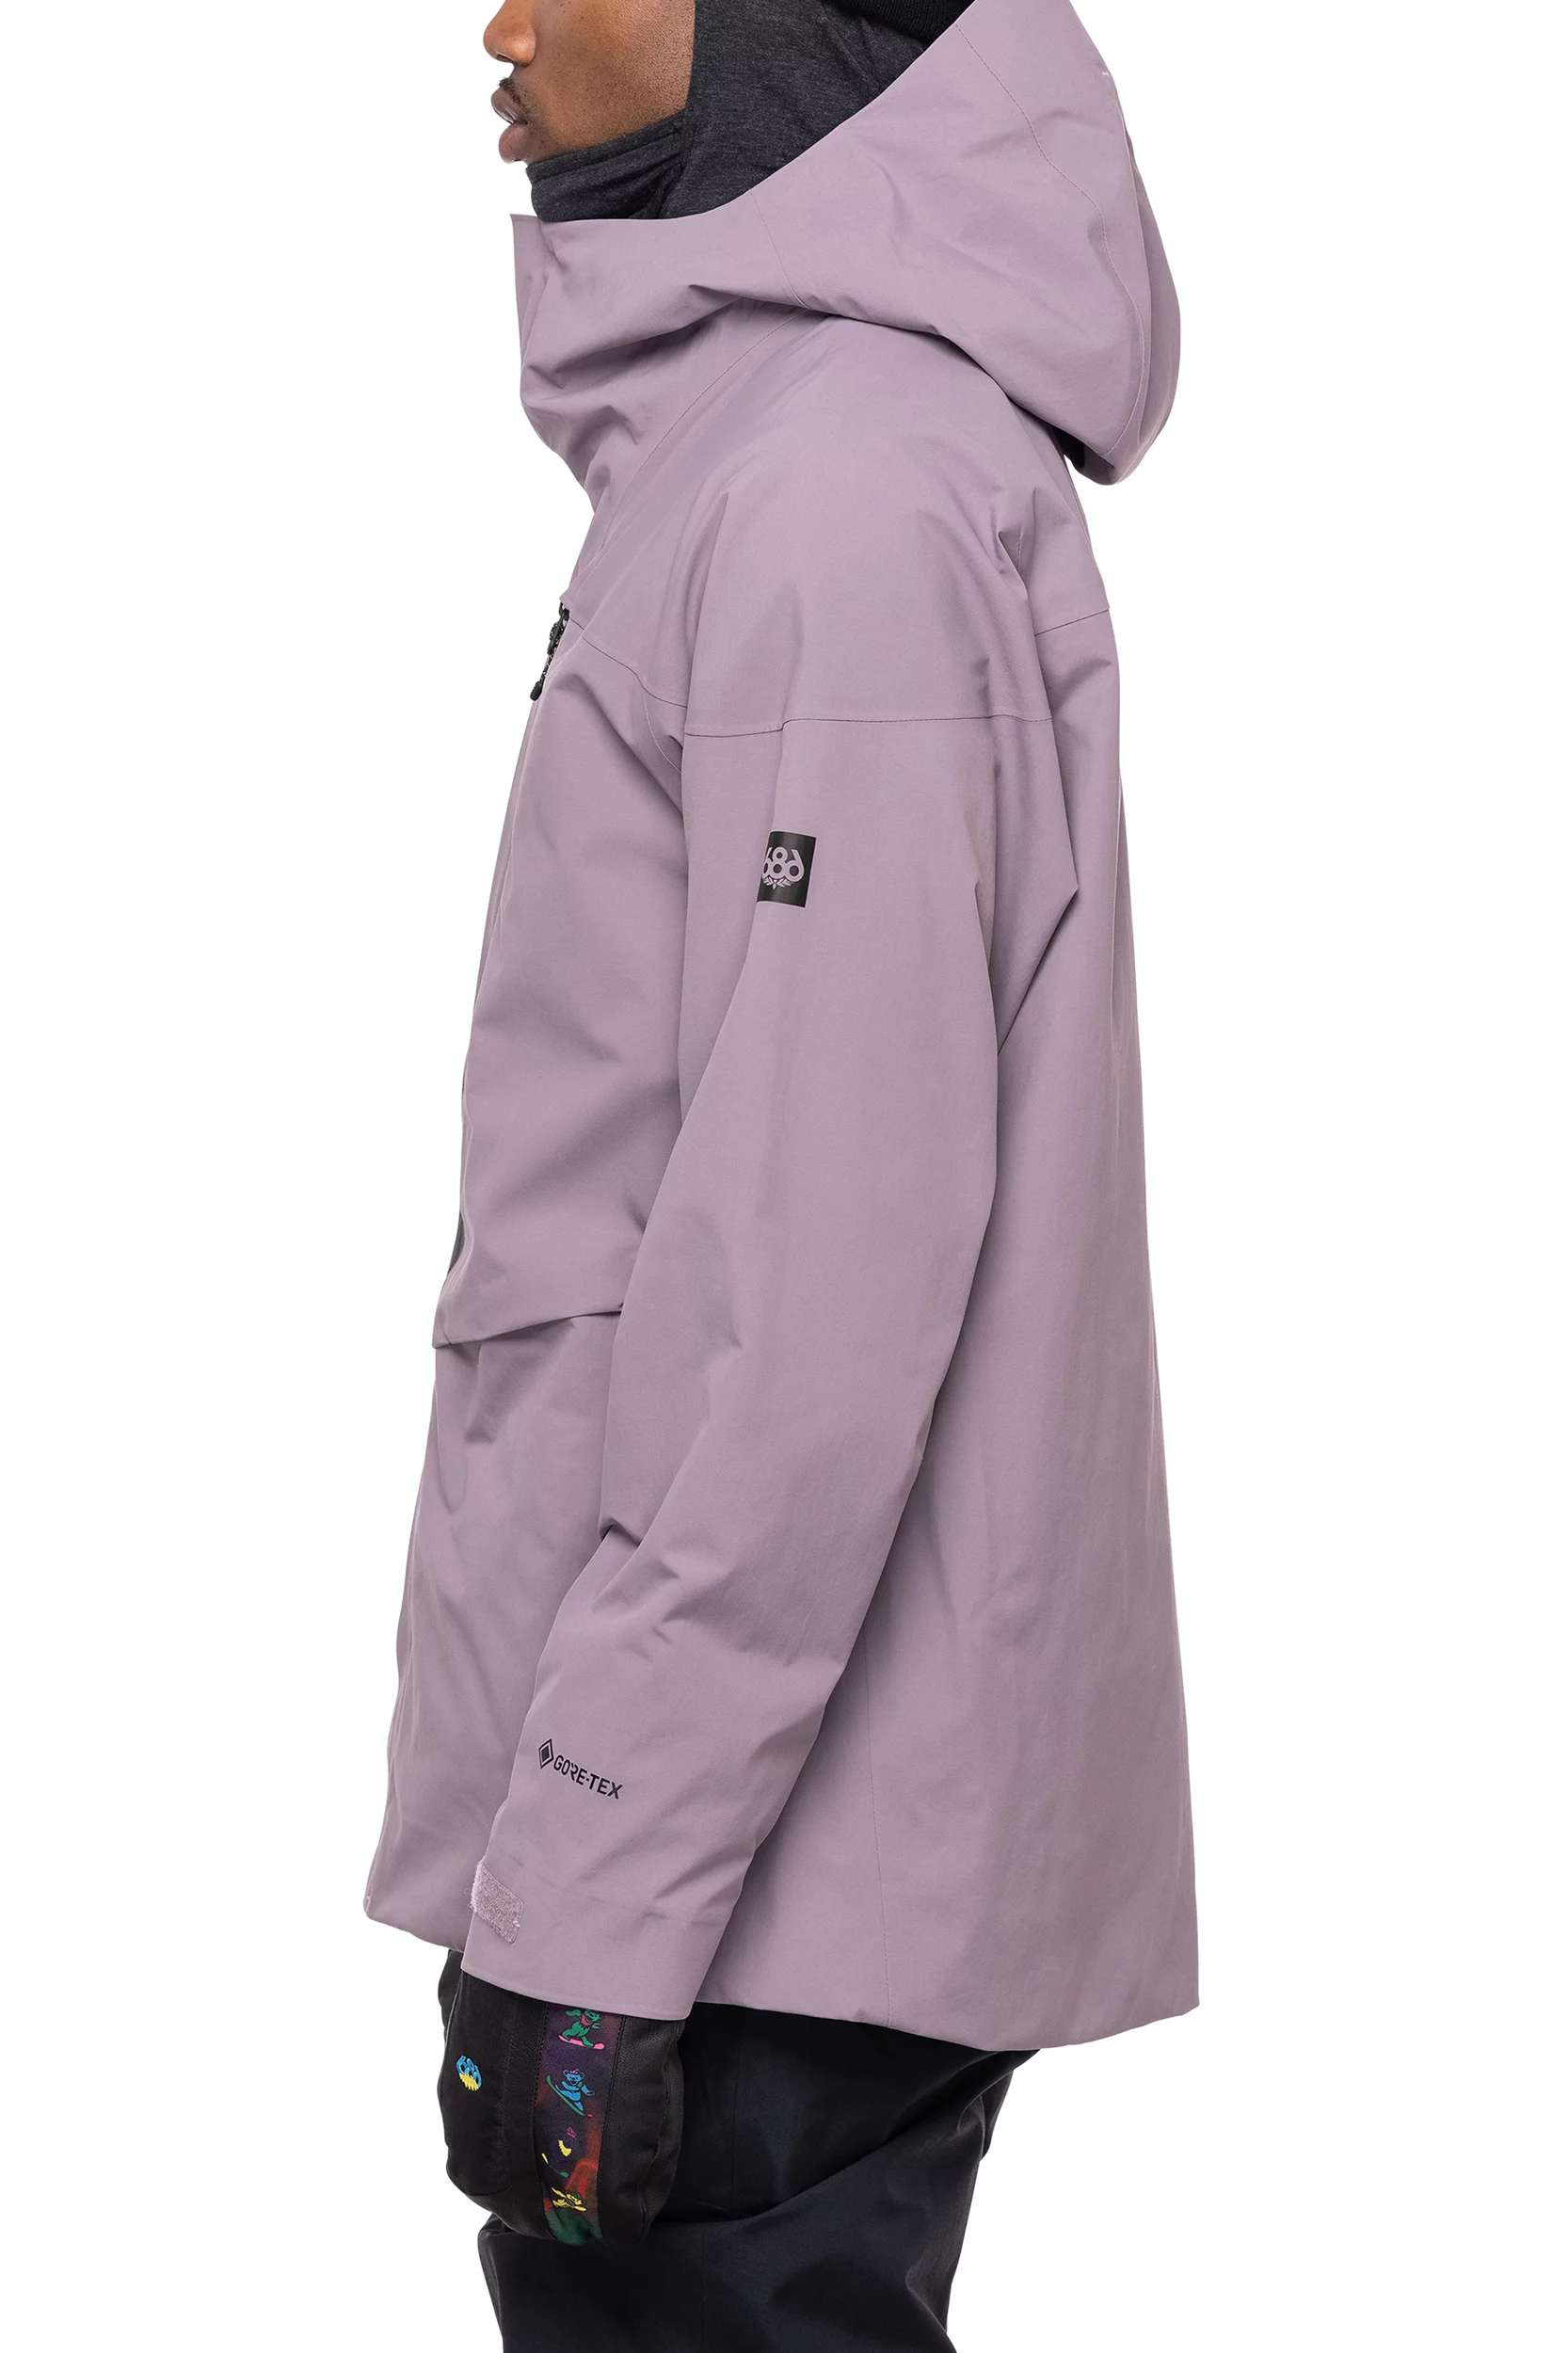 686 GORE-TEX GT Jacket - dusty orchid - Free Shipping | Tactics